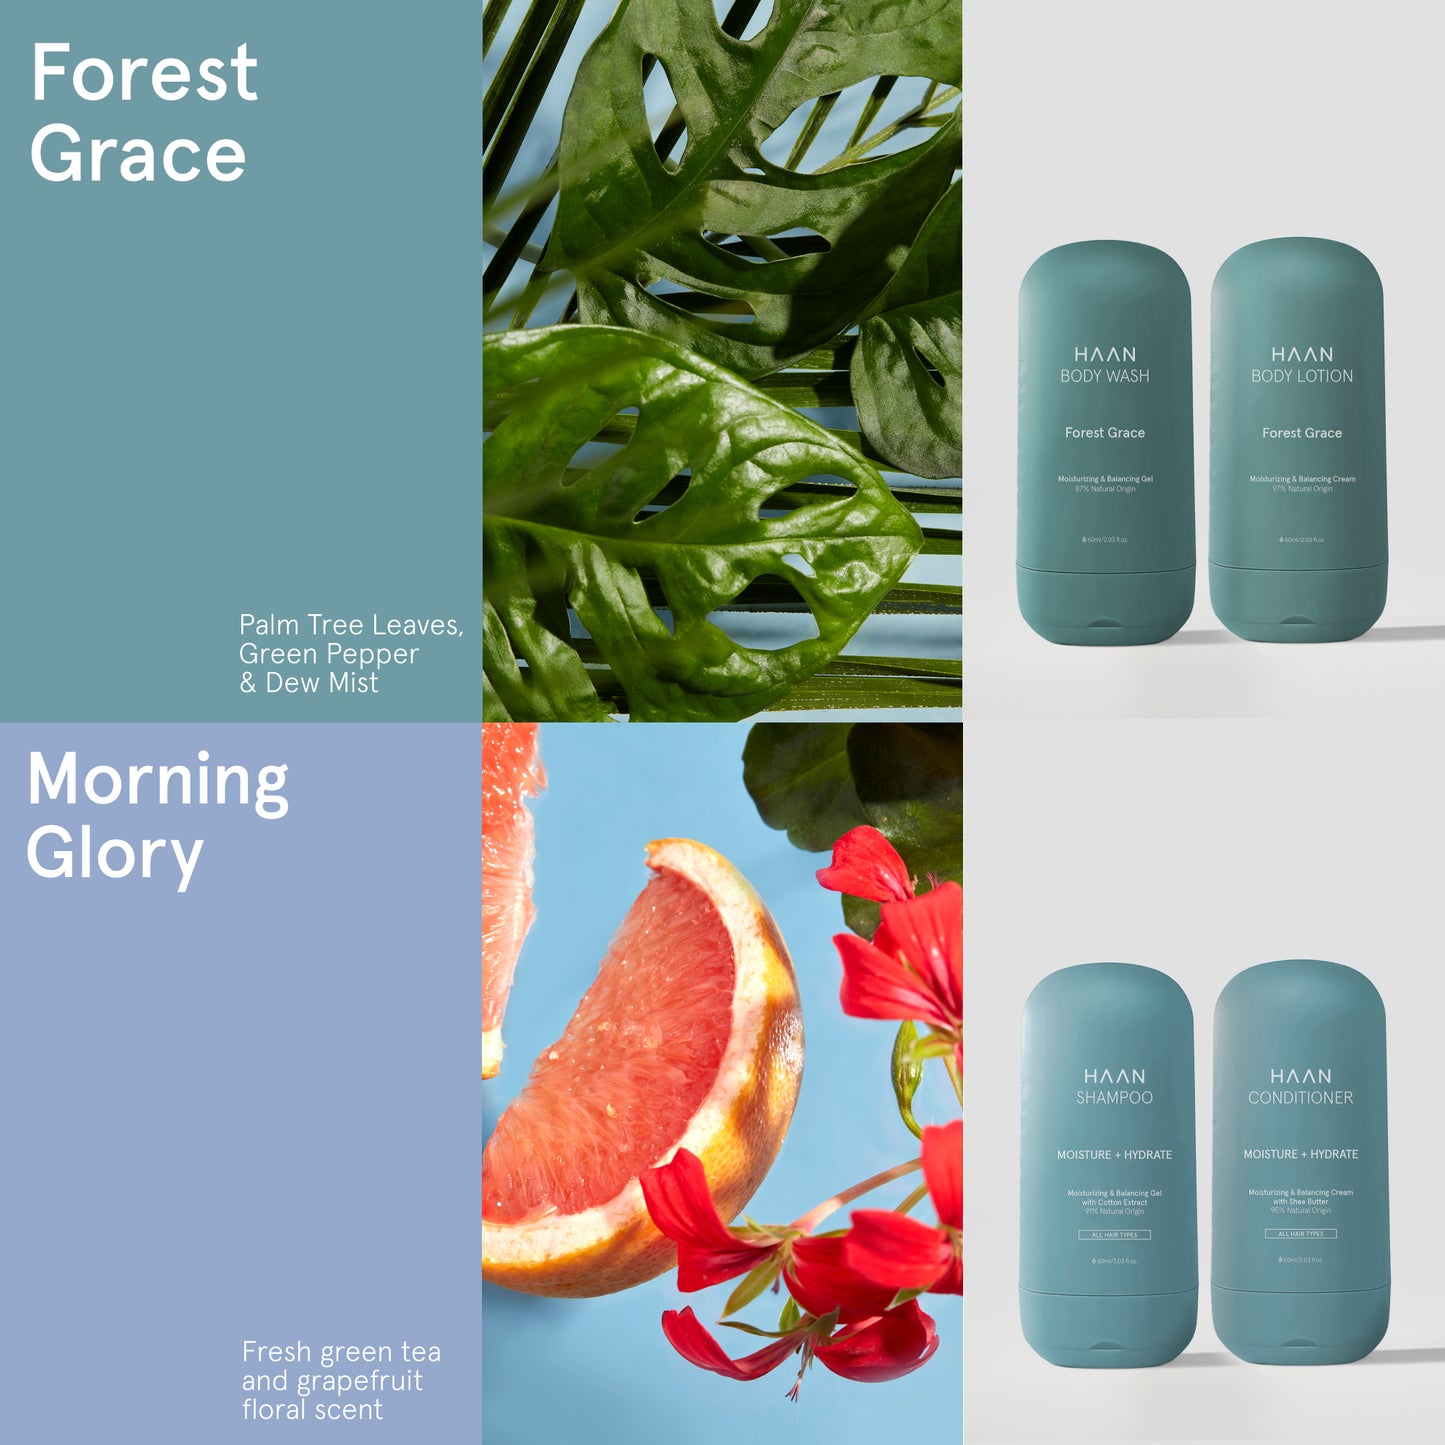 Travel Forest Grace Body Lotion